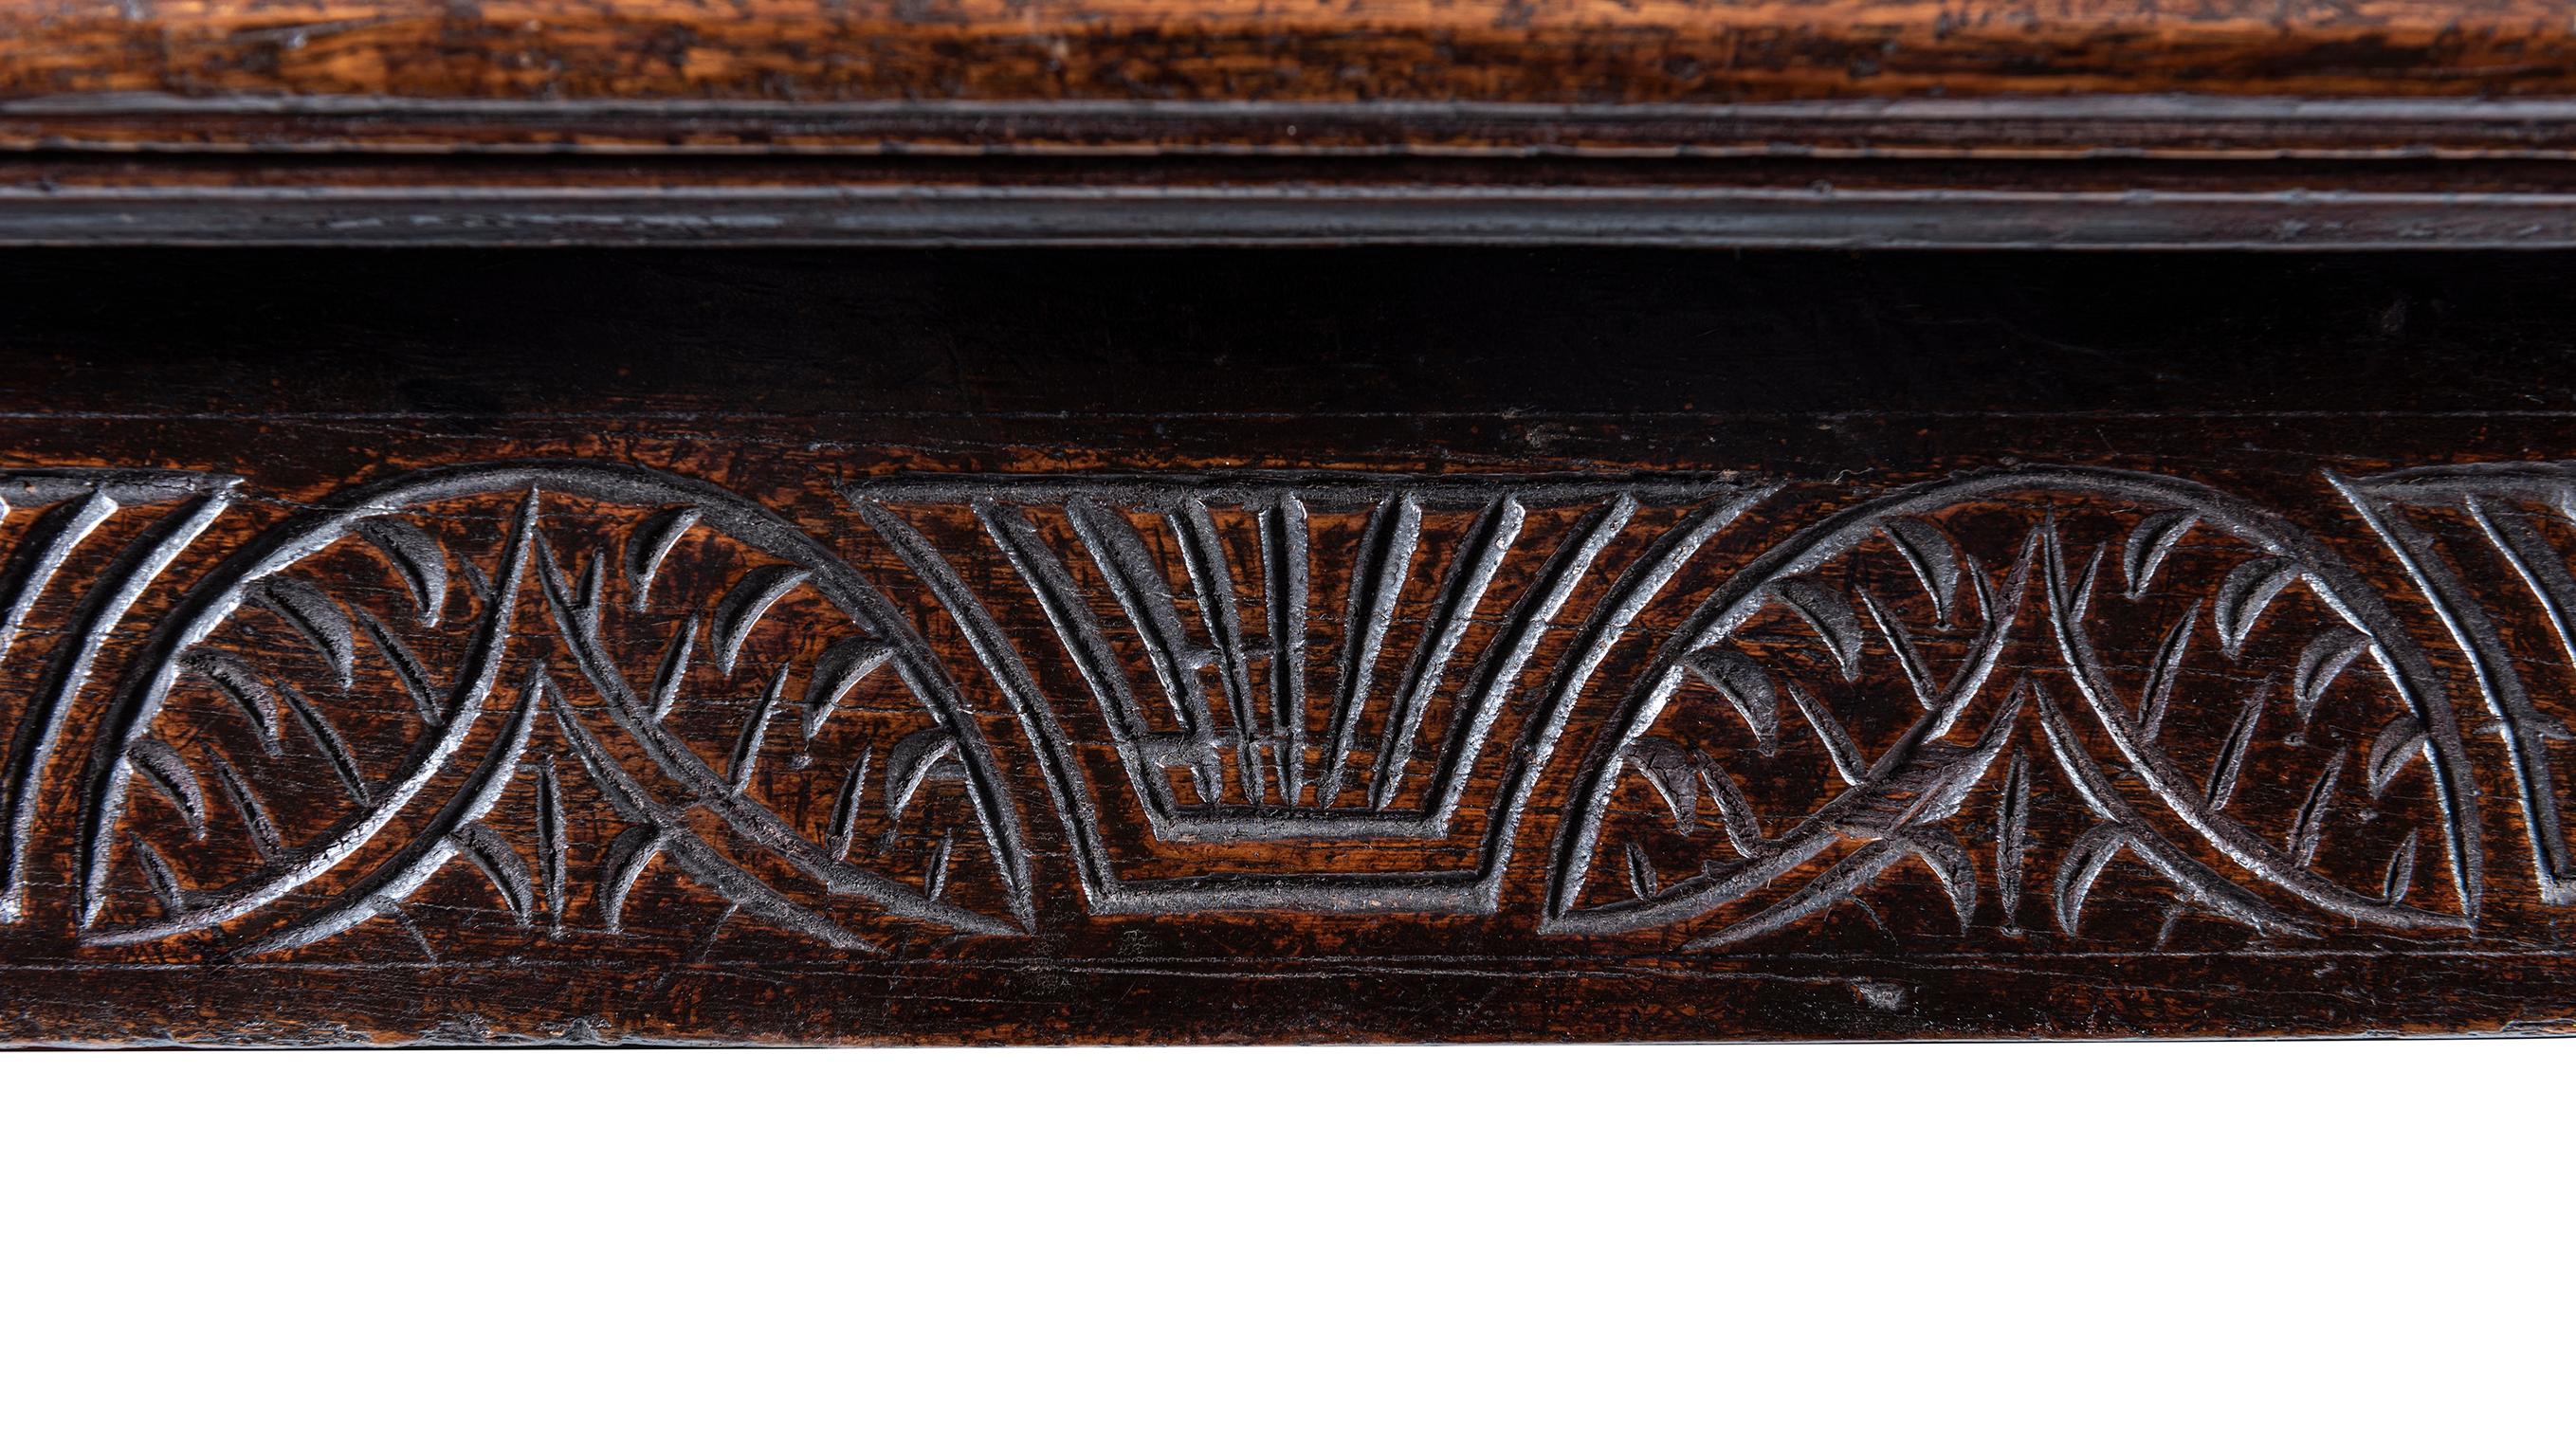 The plank top with butt ends, above a recessed and moulded apron, raised on turned legs united by an H stretcher.
The date (1656) Inscribed in relief.

Please note this piece is located in Melbourne, Australia.
Shipping times may vary based on